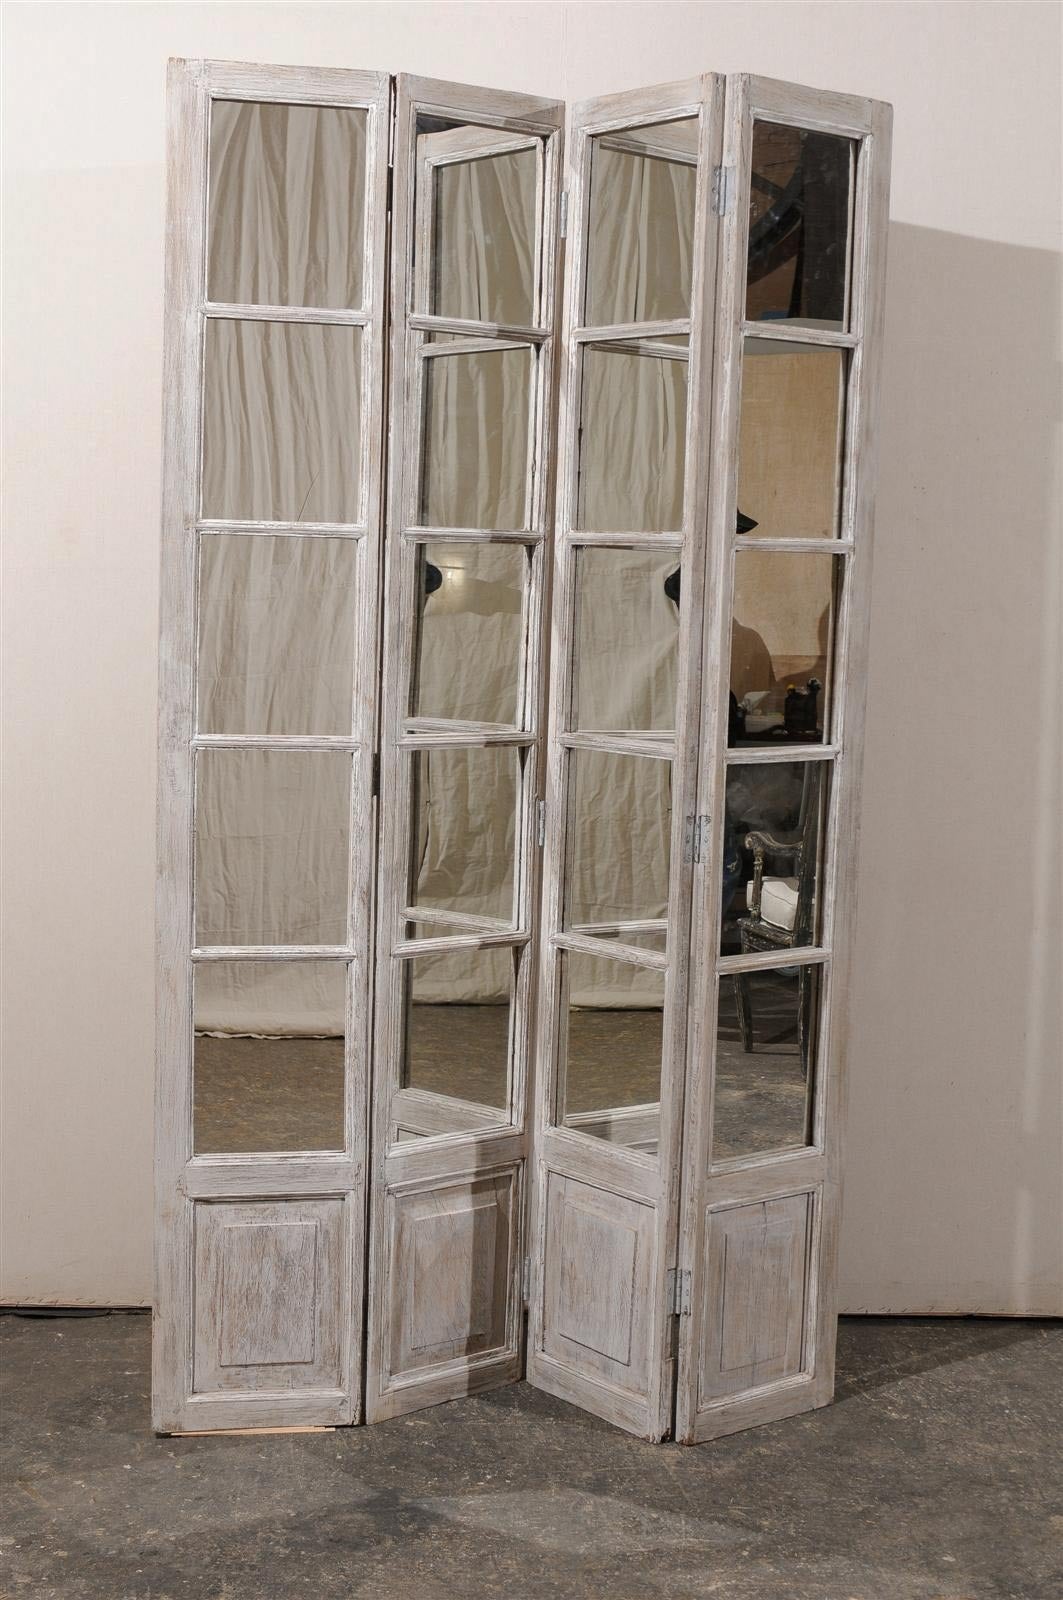 A pair of mirrored painted wood American screens from the mid-20th century with carved lower panels.

The measurements mentioned below are for each mirrored screen.